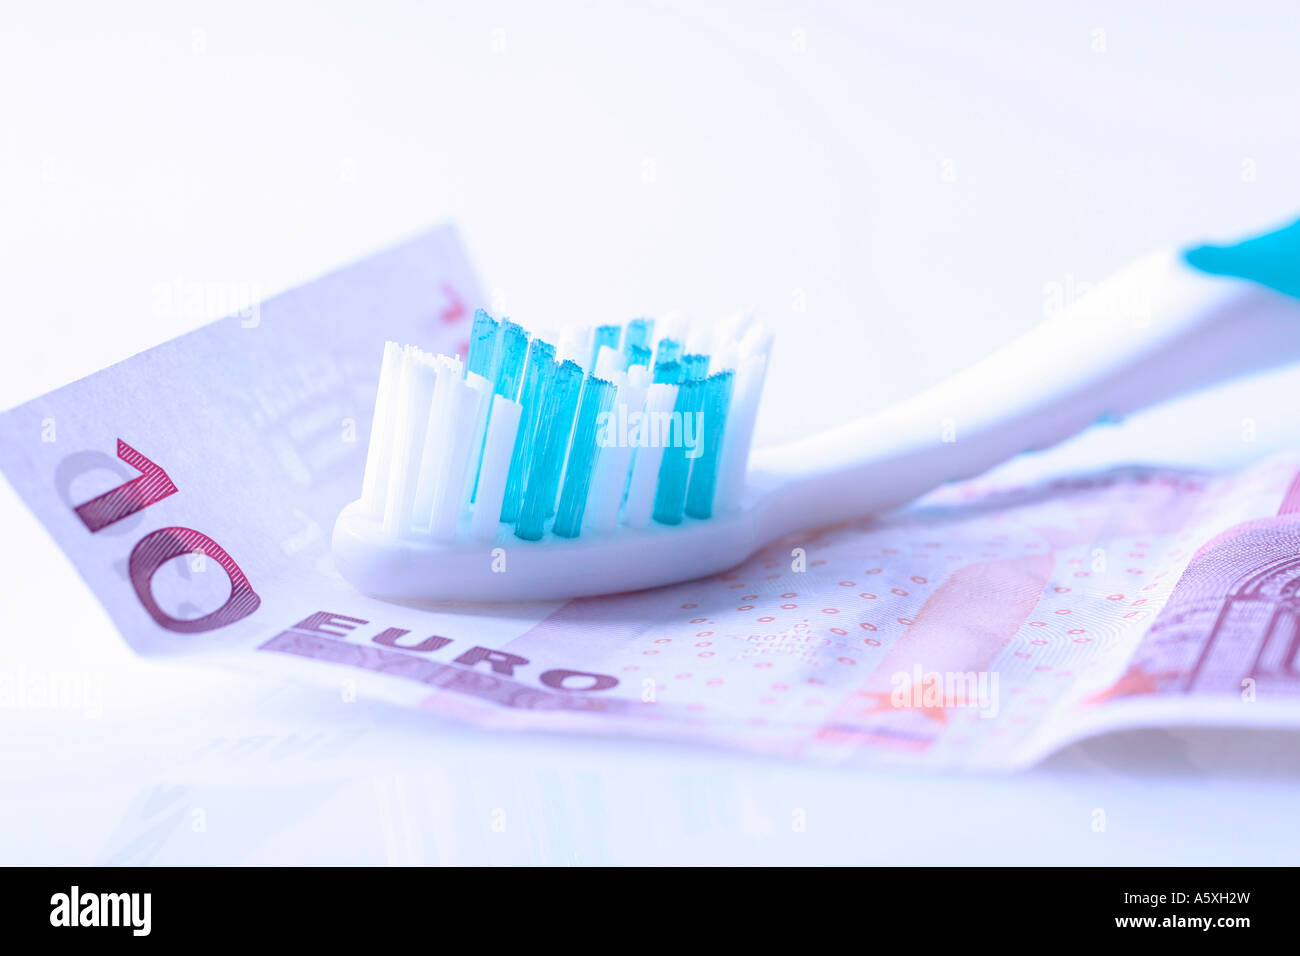 10 Euro banknote and toothbrush close up Stock Photo